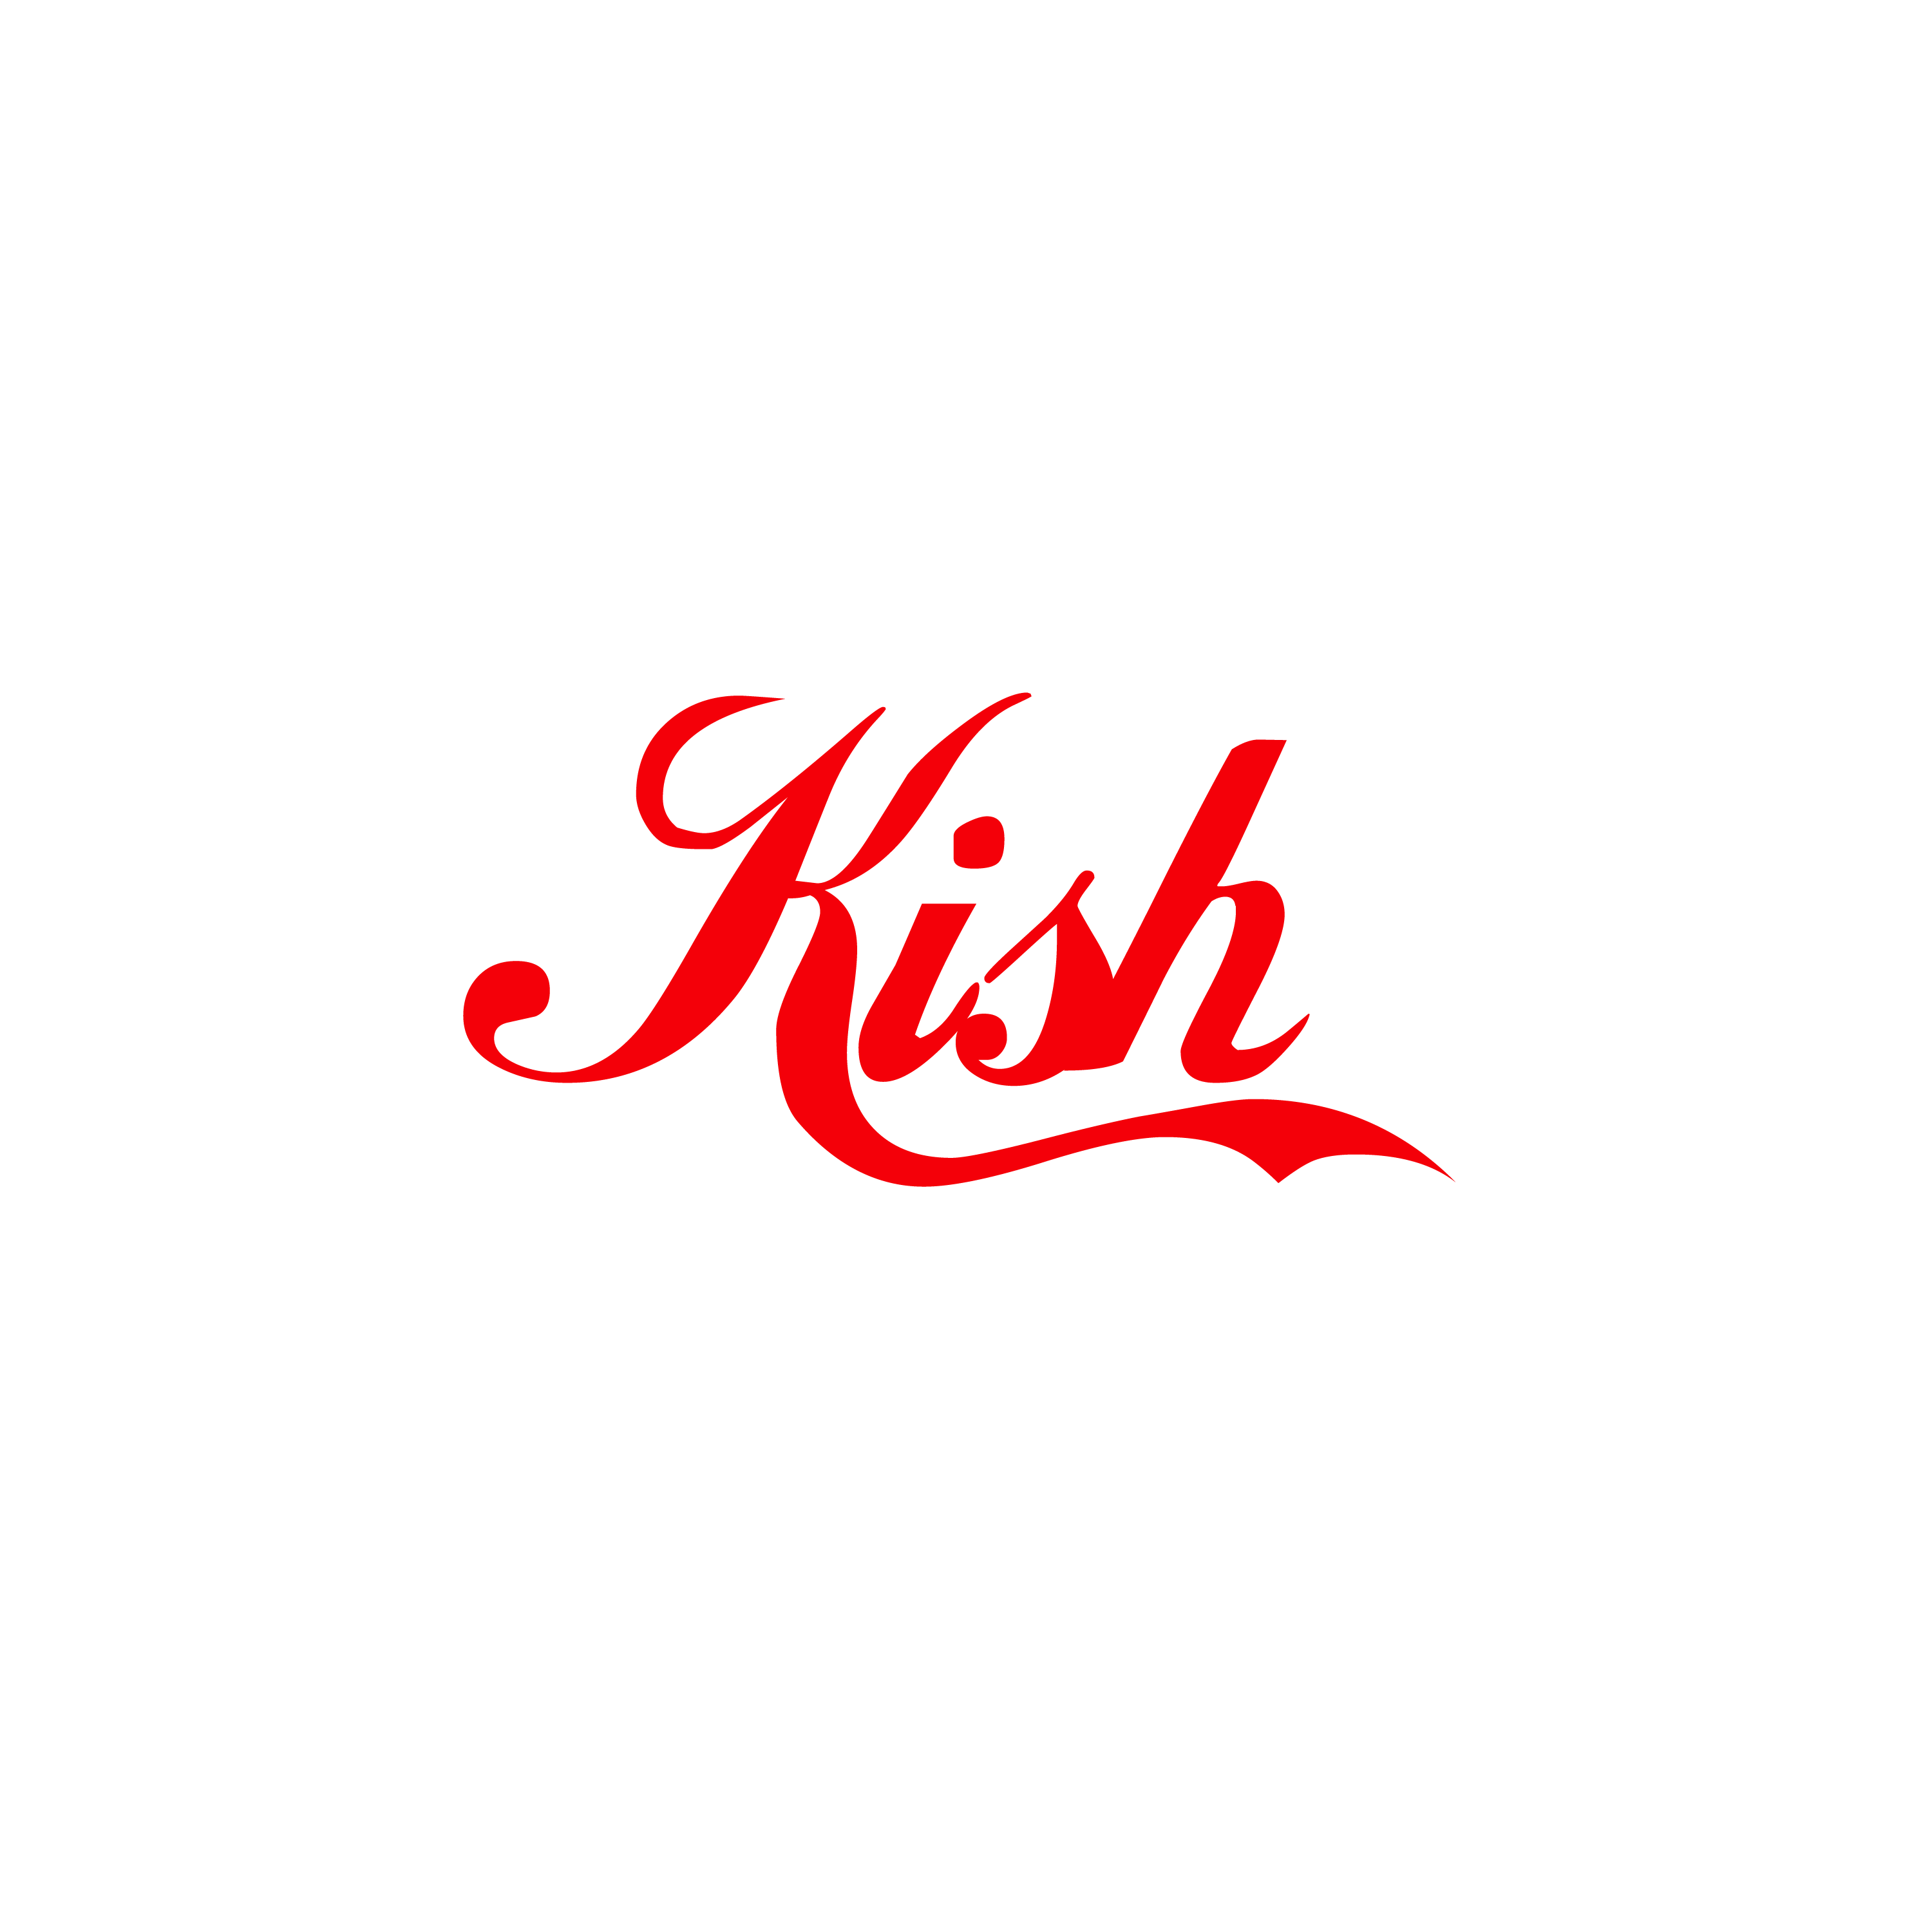 Parody logo featuring 'KISH' in place of famous brands